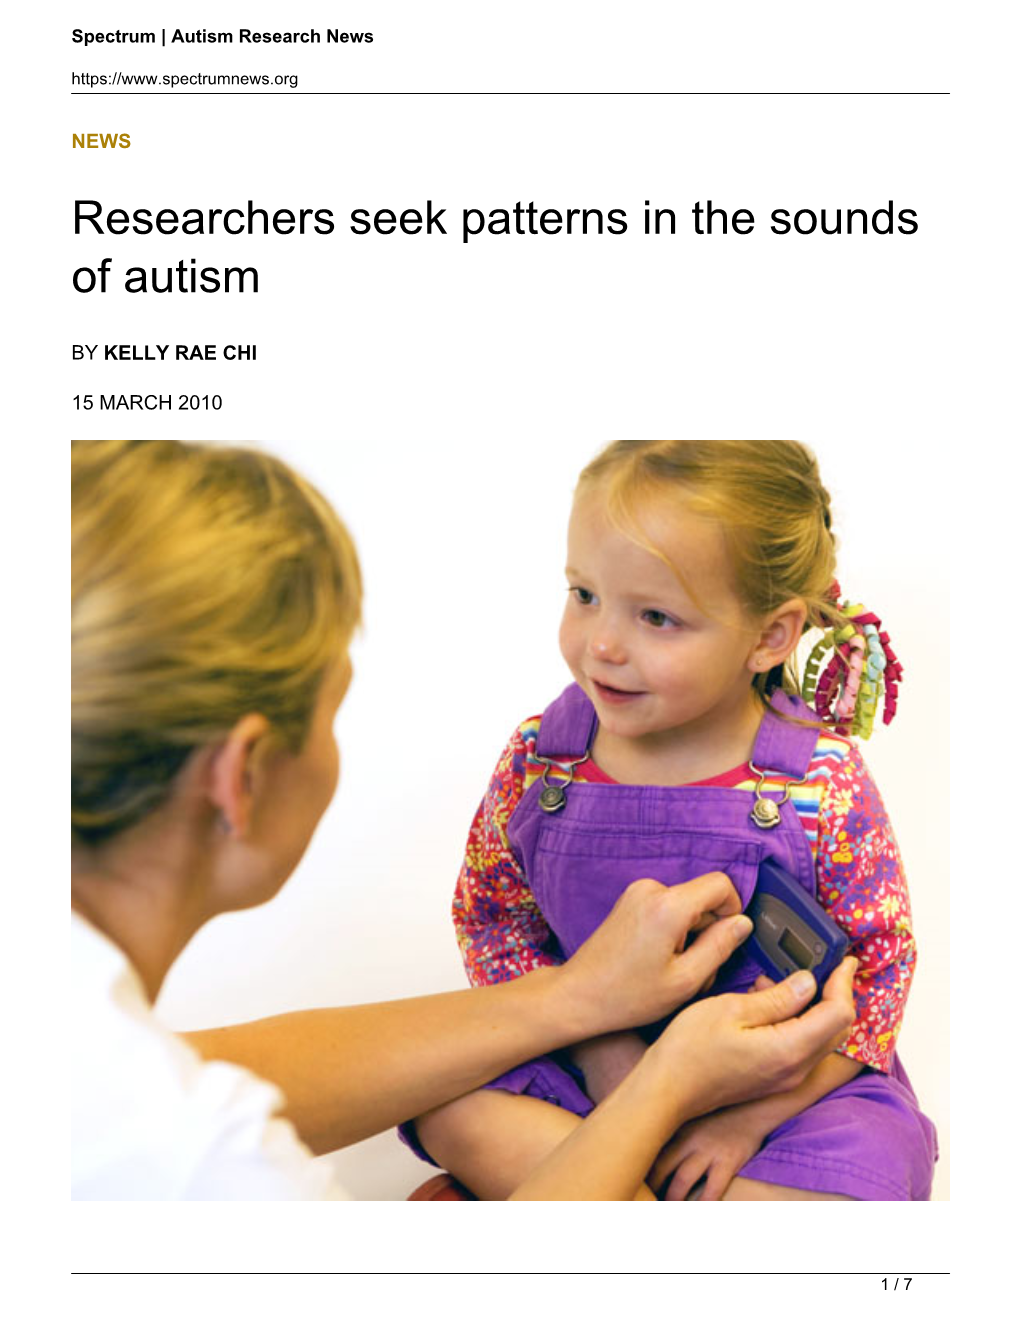 Researchers Seek Patterns in the Sounds of Autism